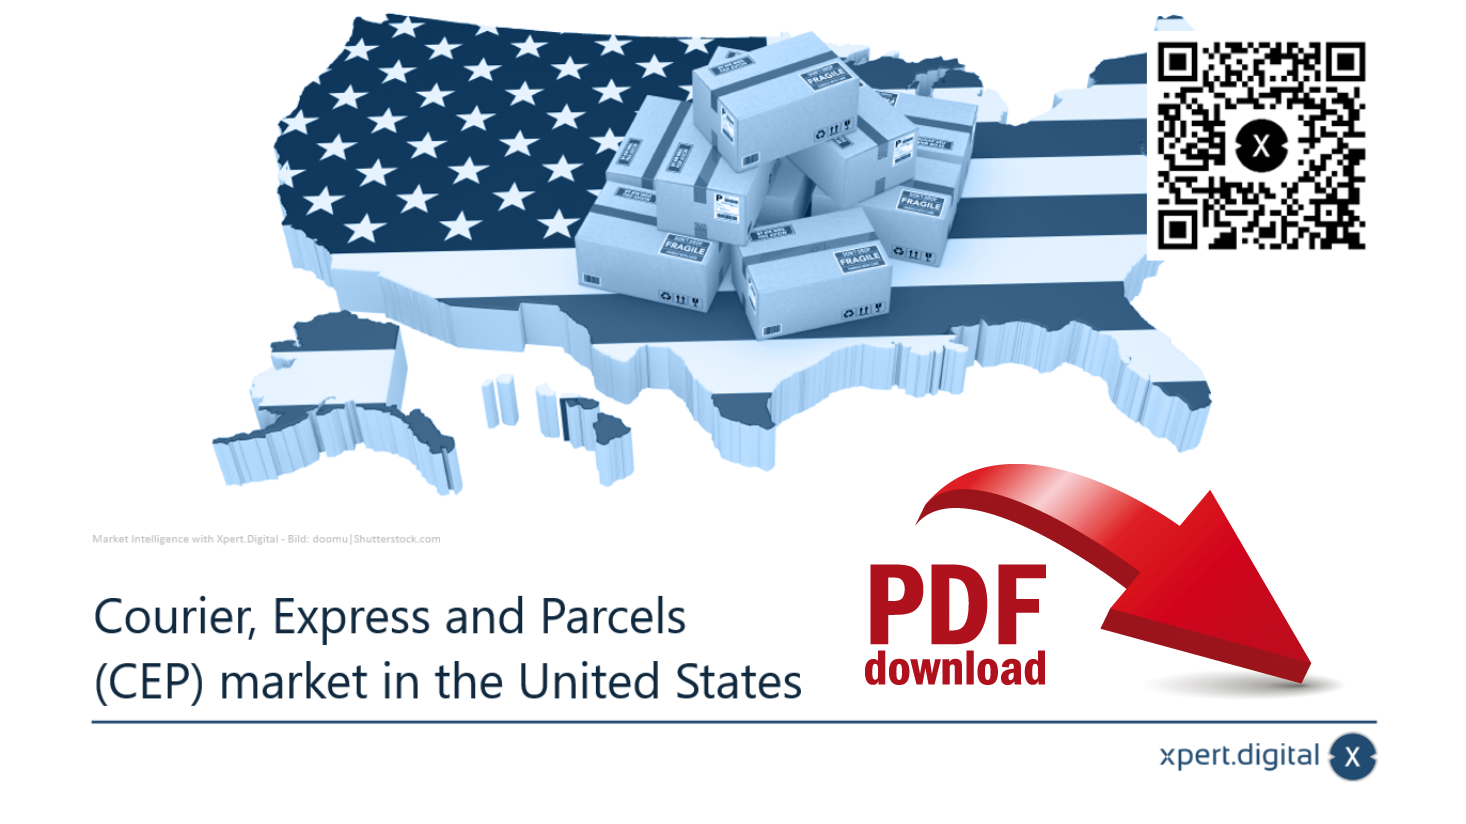 Geschützt: Courier, Express and Parcels (CEP) market in the United States